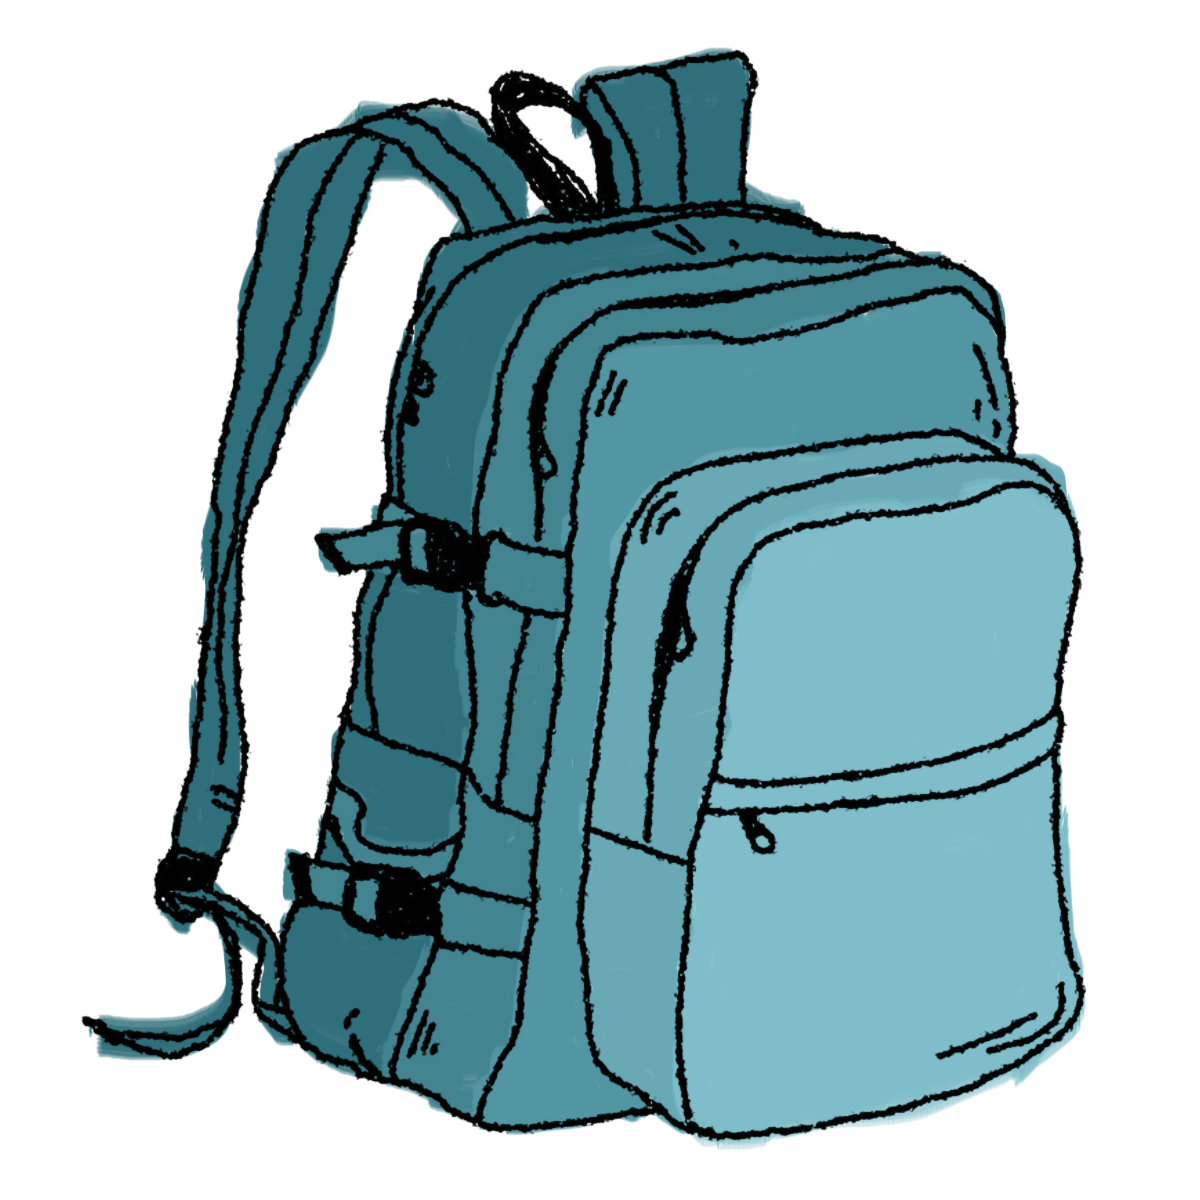 Hiking backpack clipart free clipart images